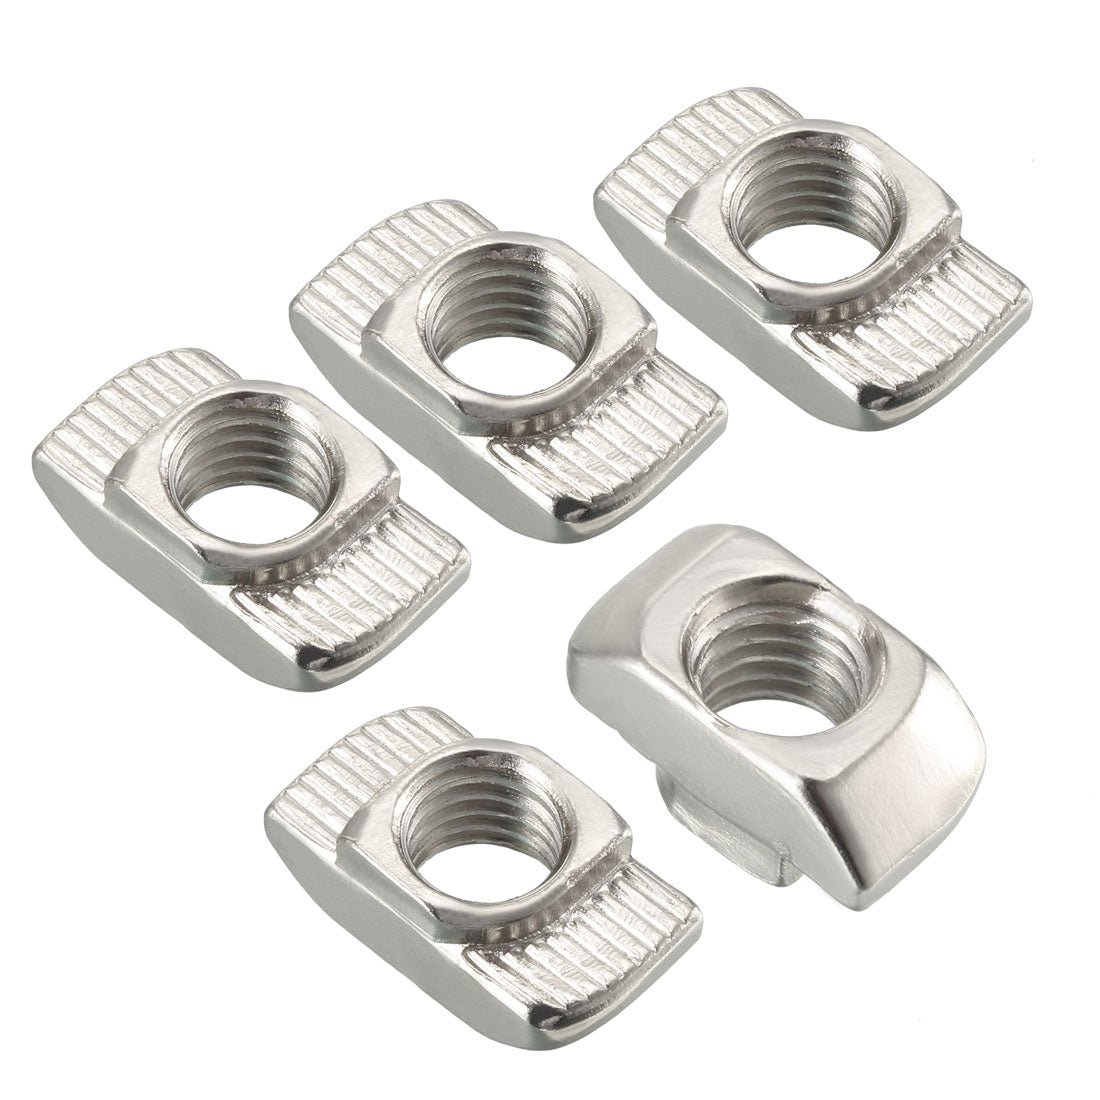 Uxcell Uxcell Sliding T Slot Nuts, M5 Thread for 2020 Series Aluminum Extrusion Profile 20pcs